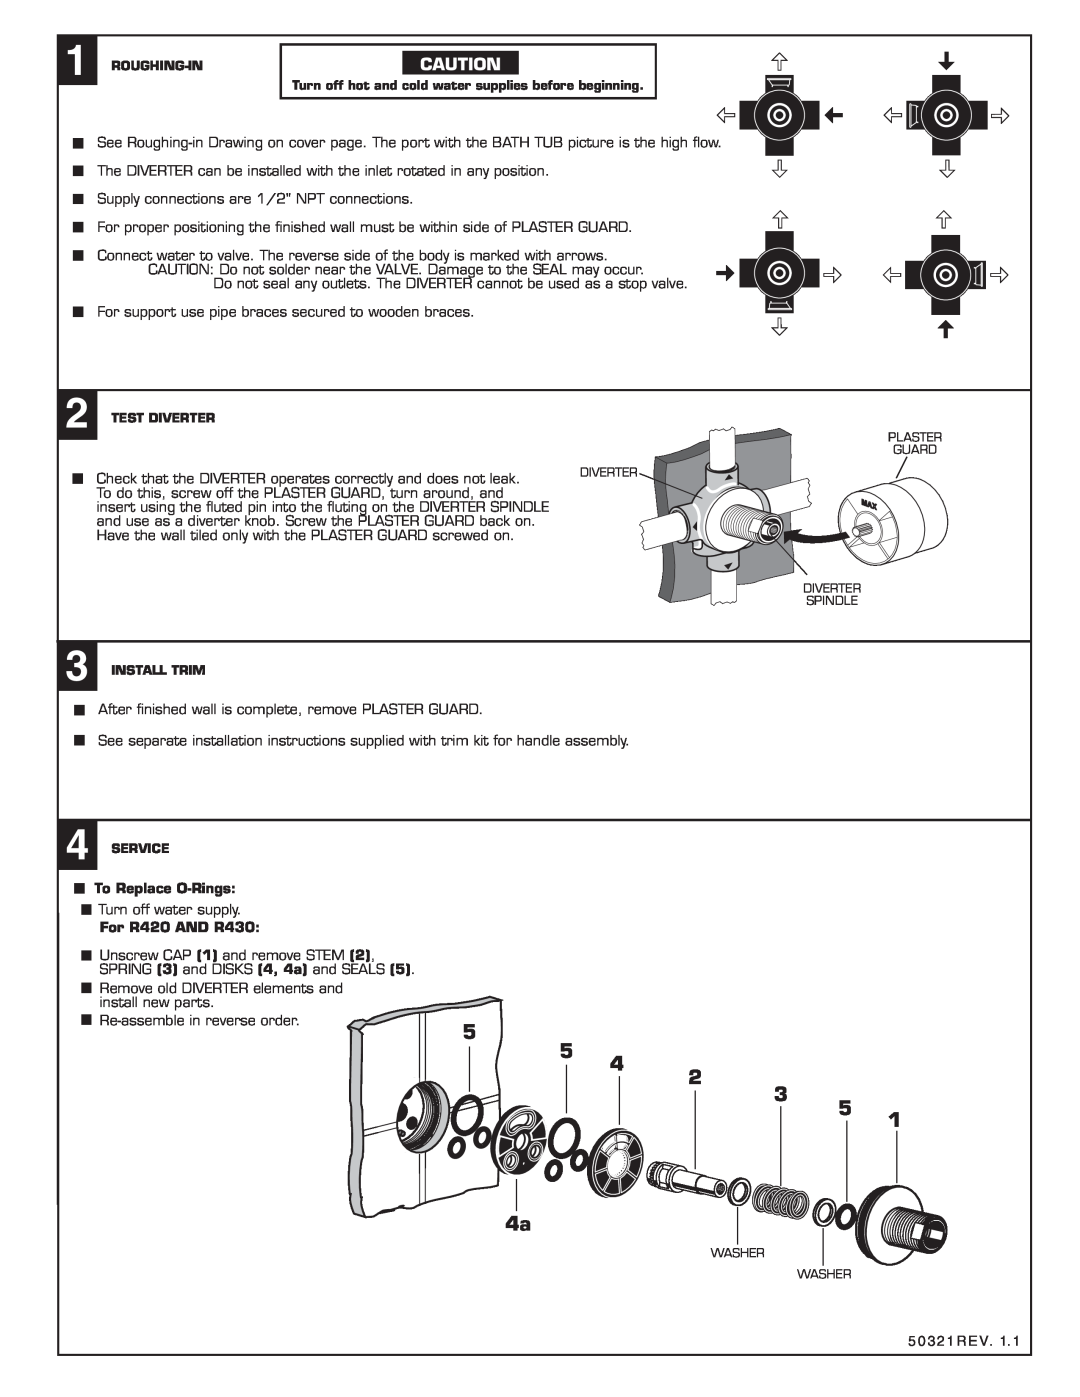 American Standard Shower Systems installation instructions To Replace O-Rings, For R420 AND R430 